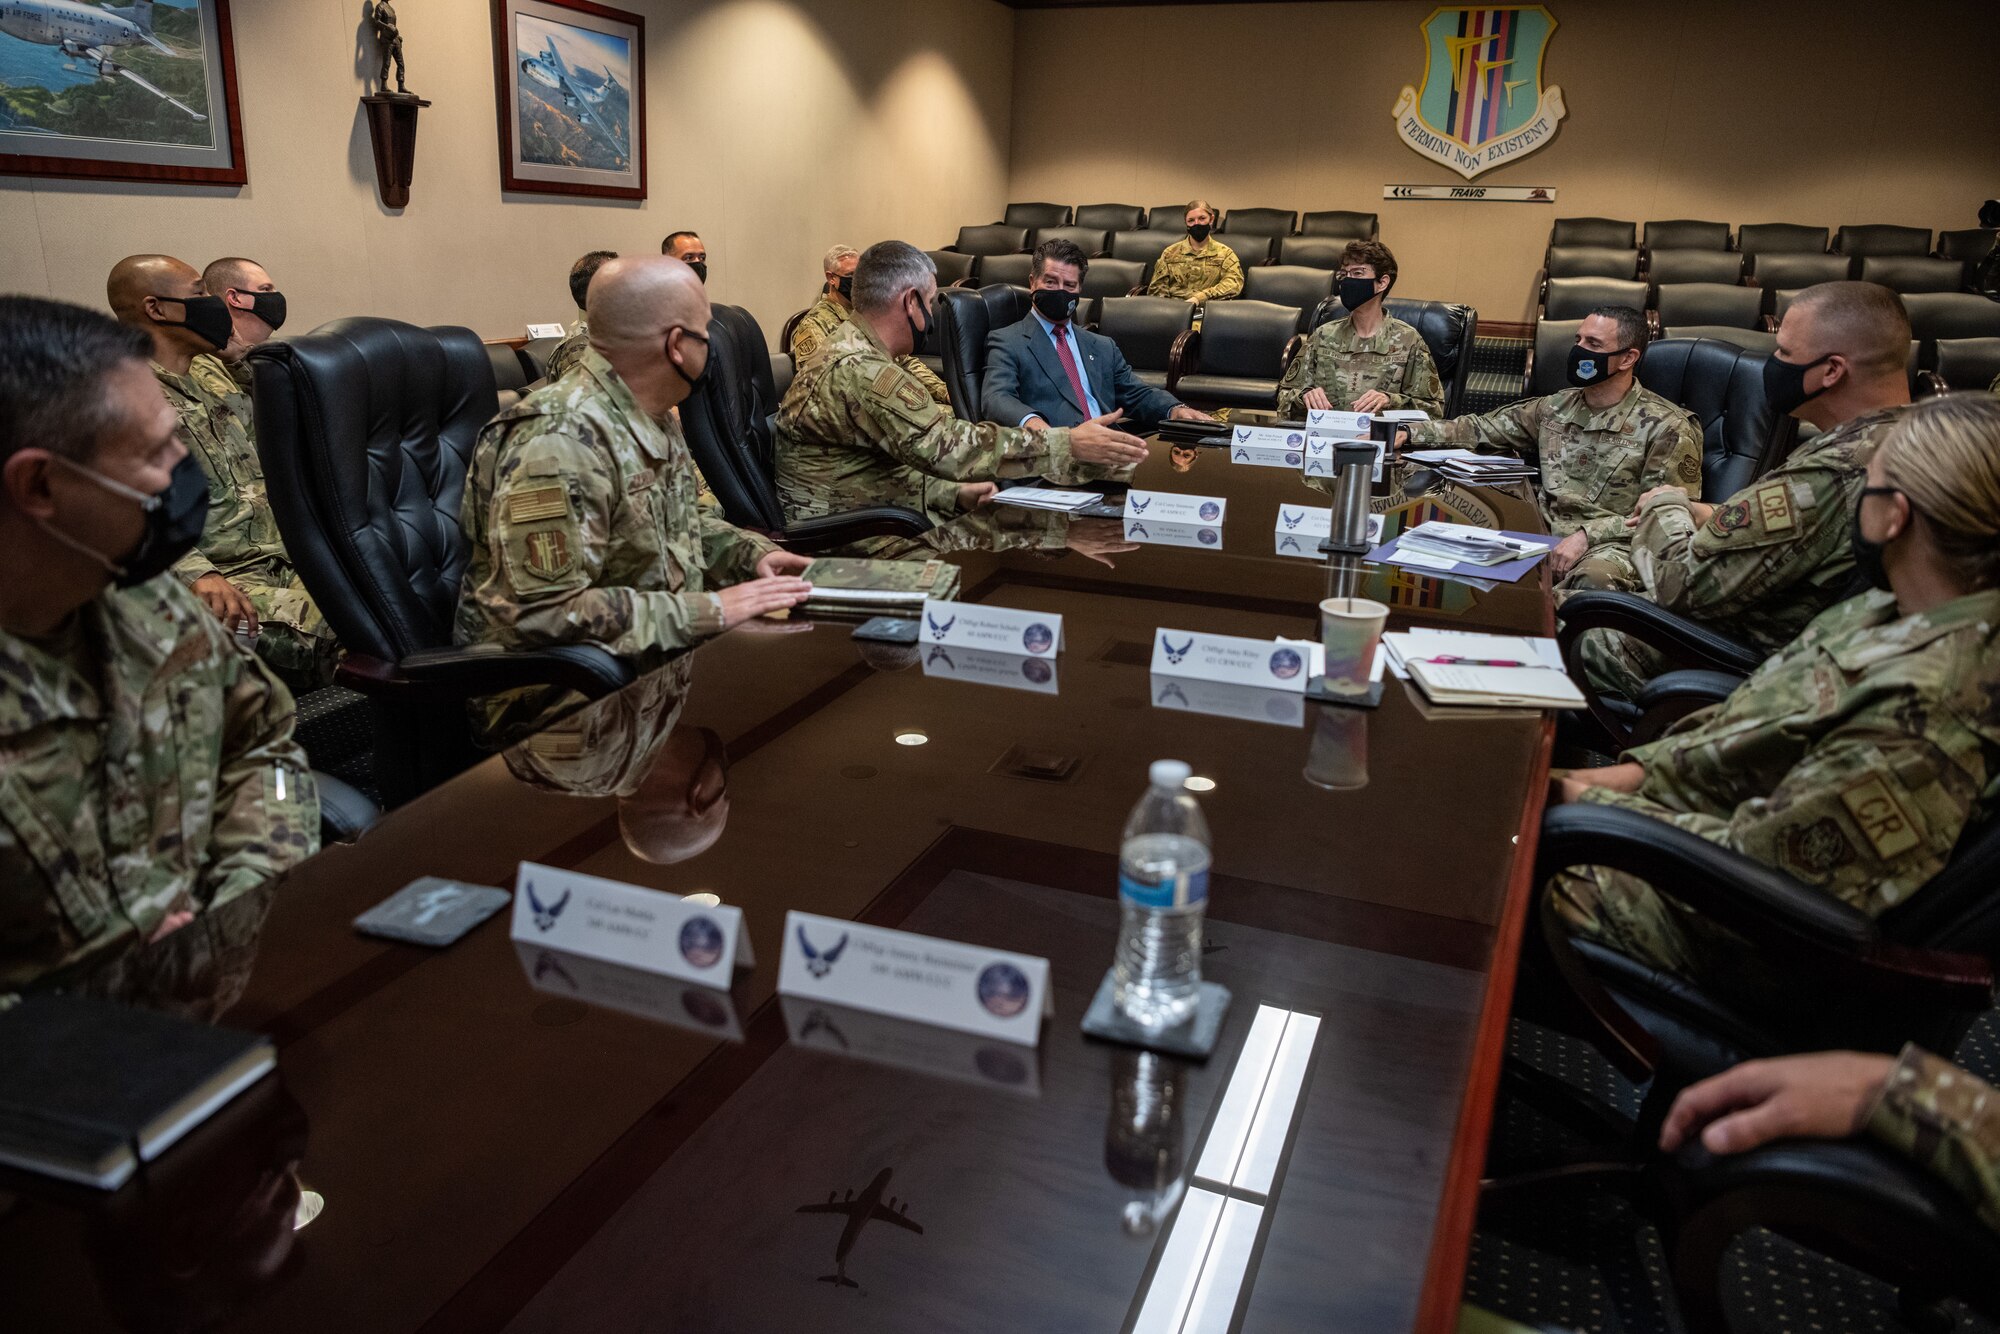 Military members sit in a conference room around a long table.